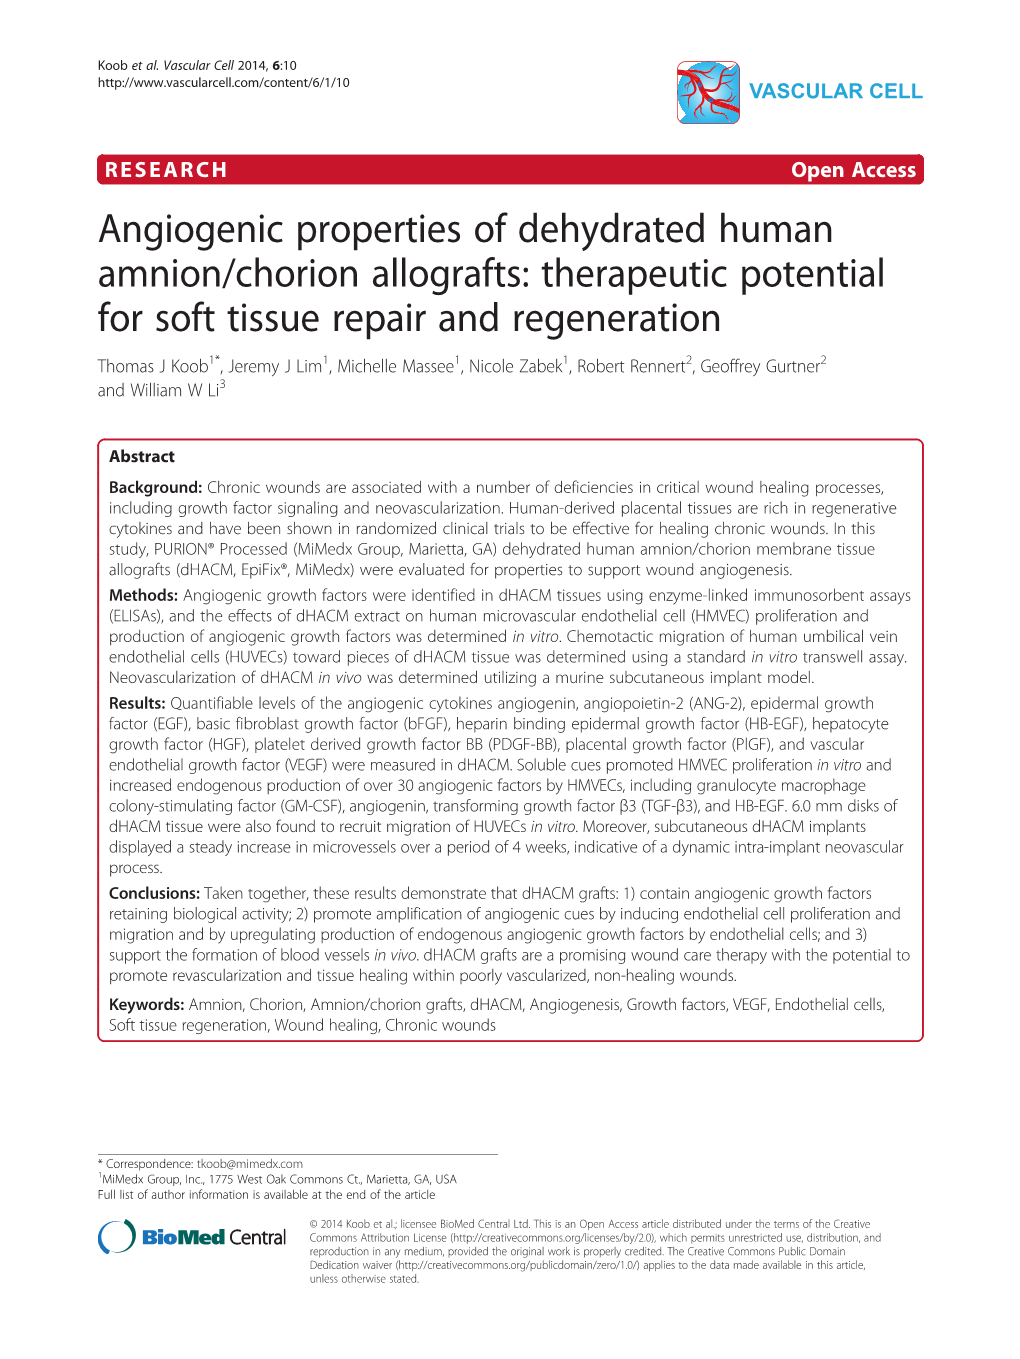 Angiogenic Properties of Dehydrated Human Amnion/Chorion Allografts: Therapeutic Potential for Soft Tissue Repair and Regenerati